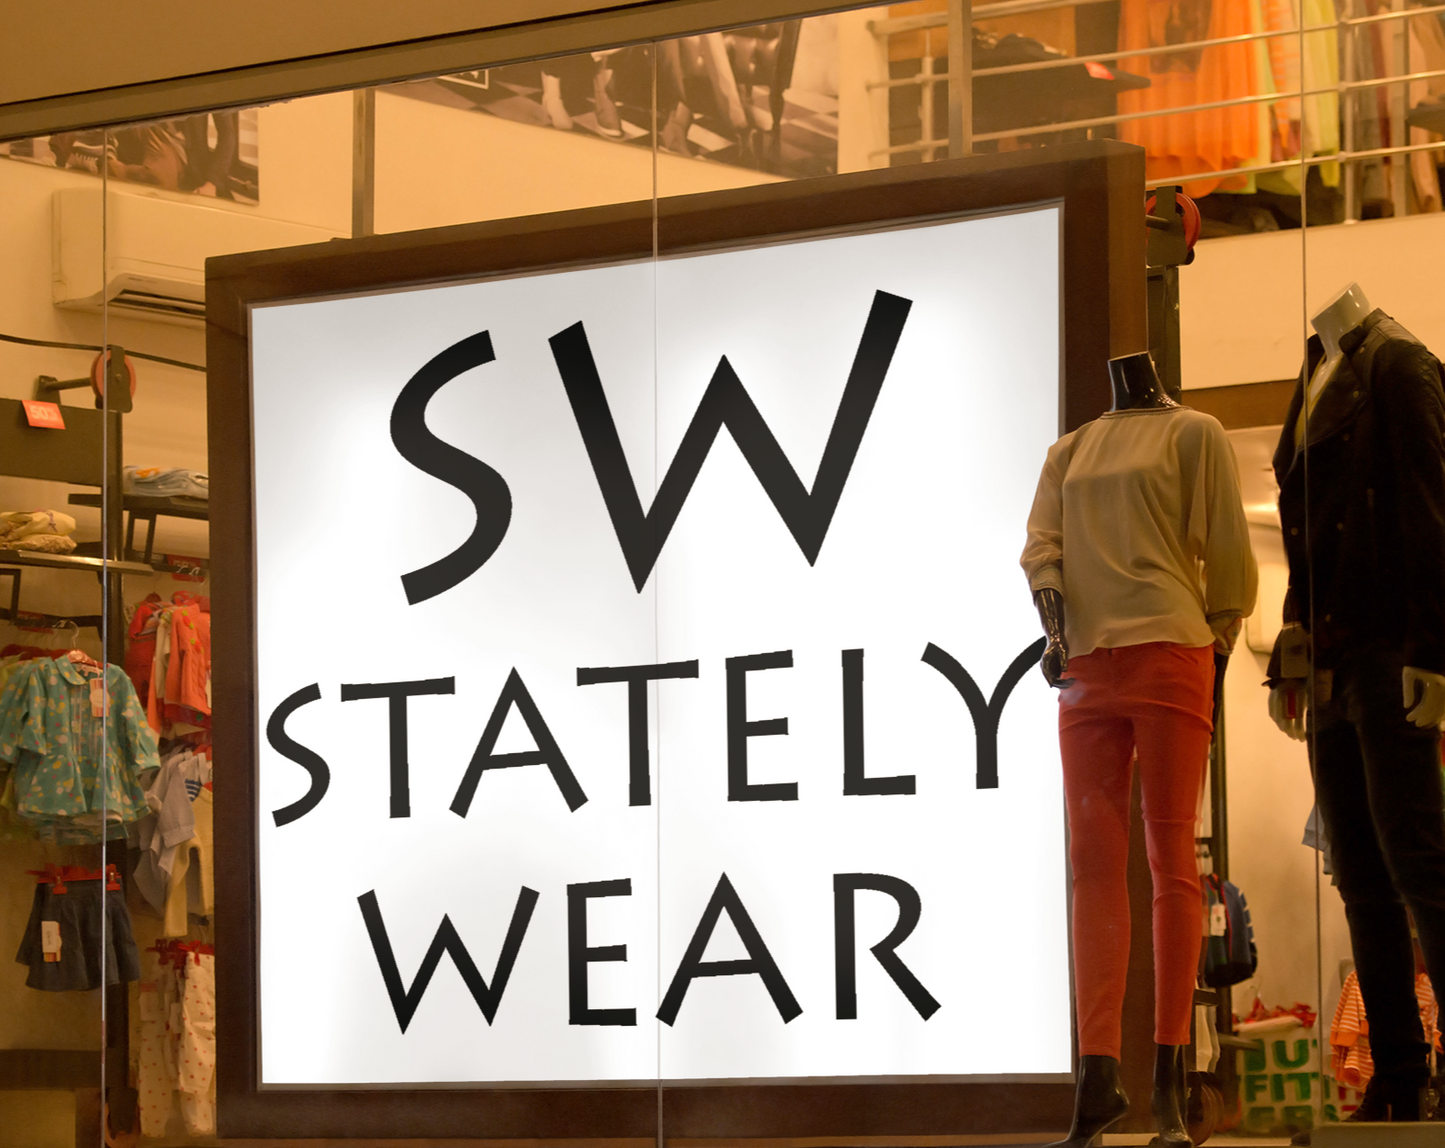 Stately Wear logo in Target window display for flag hippie collection.